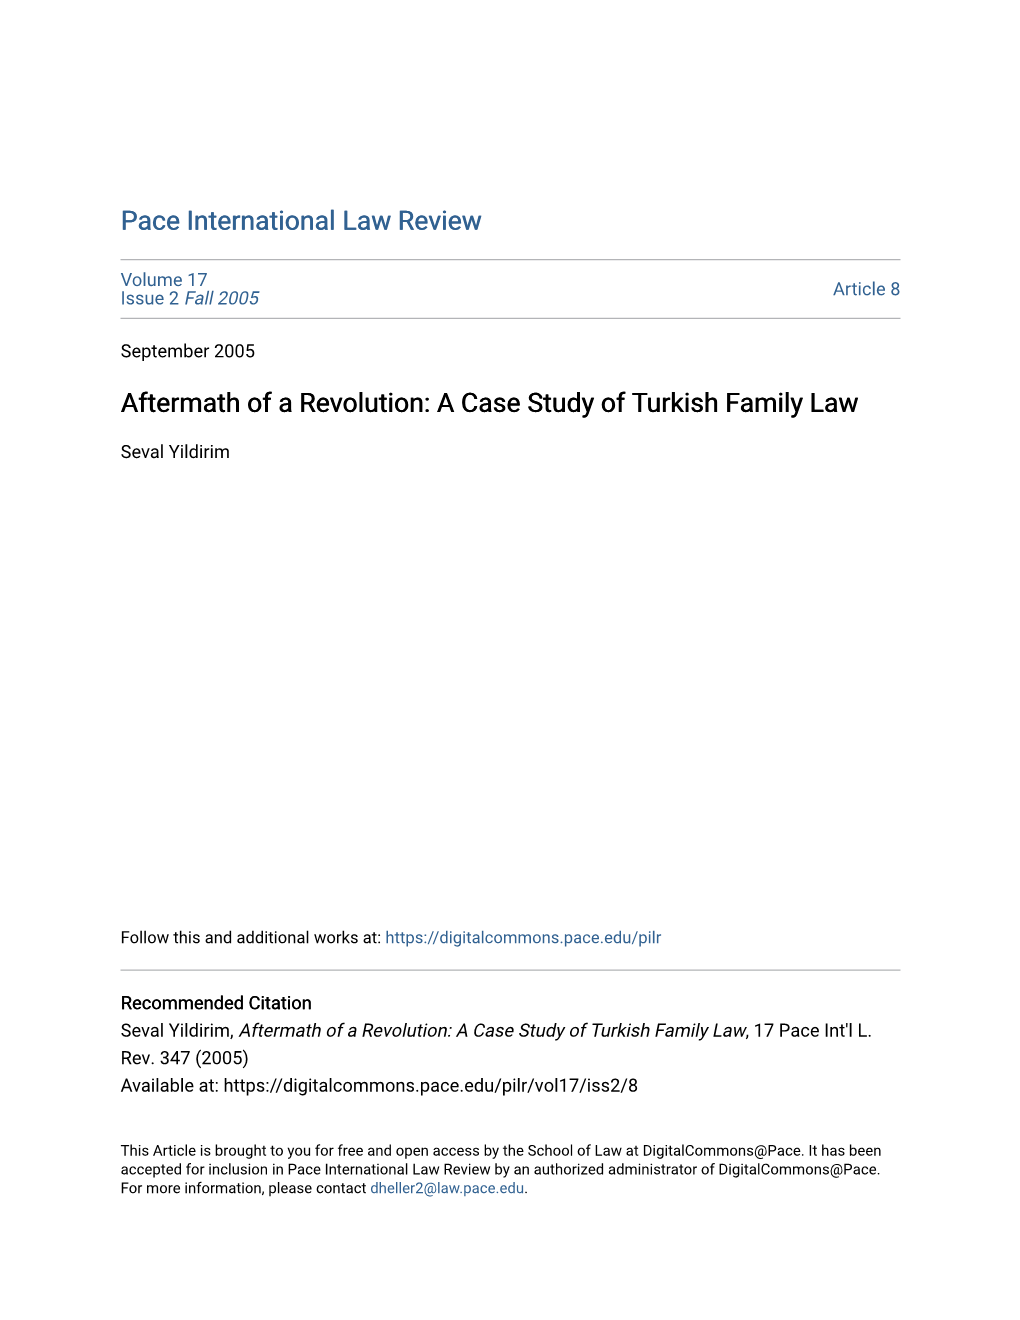 Aftermath of a Revolution: a Case Study of Turkish Family Law